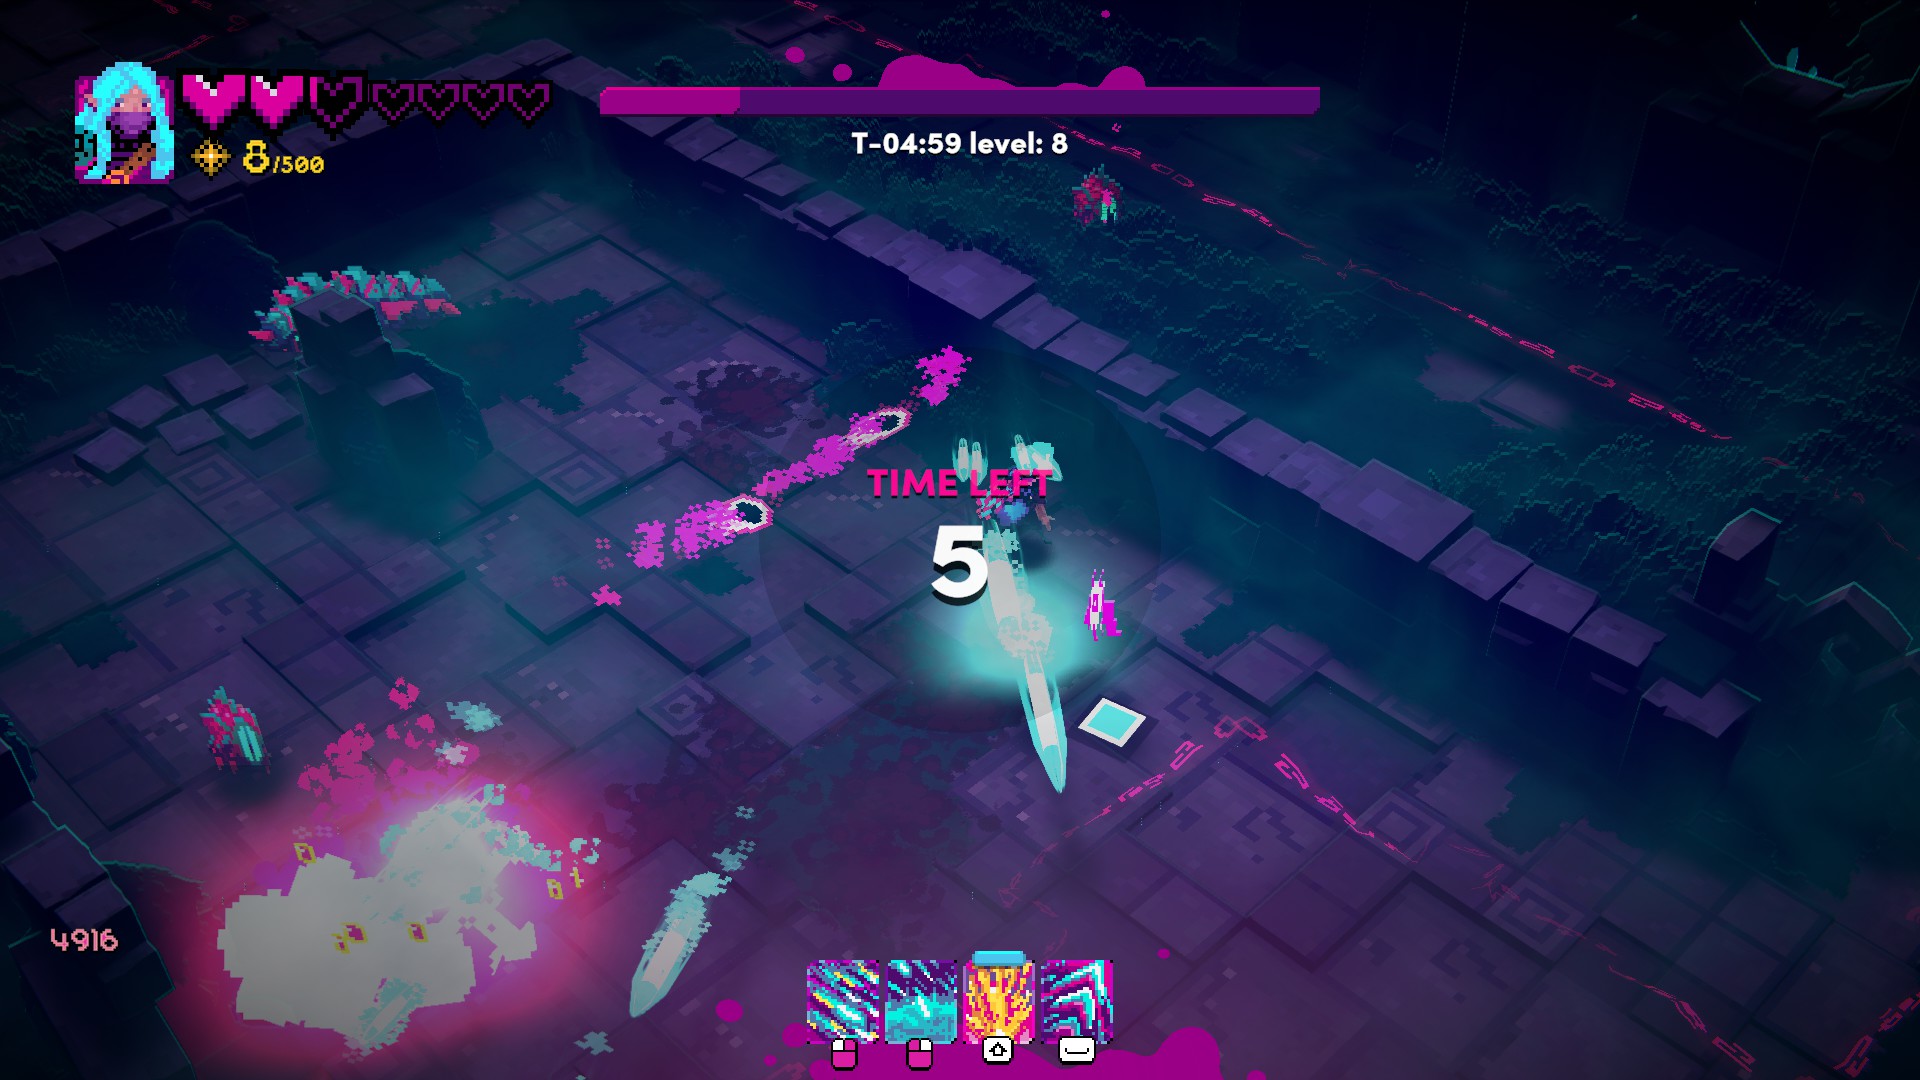 screenshot showing there is 5 seconds left of time before game over.